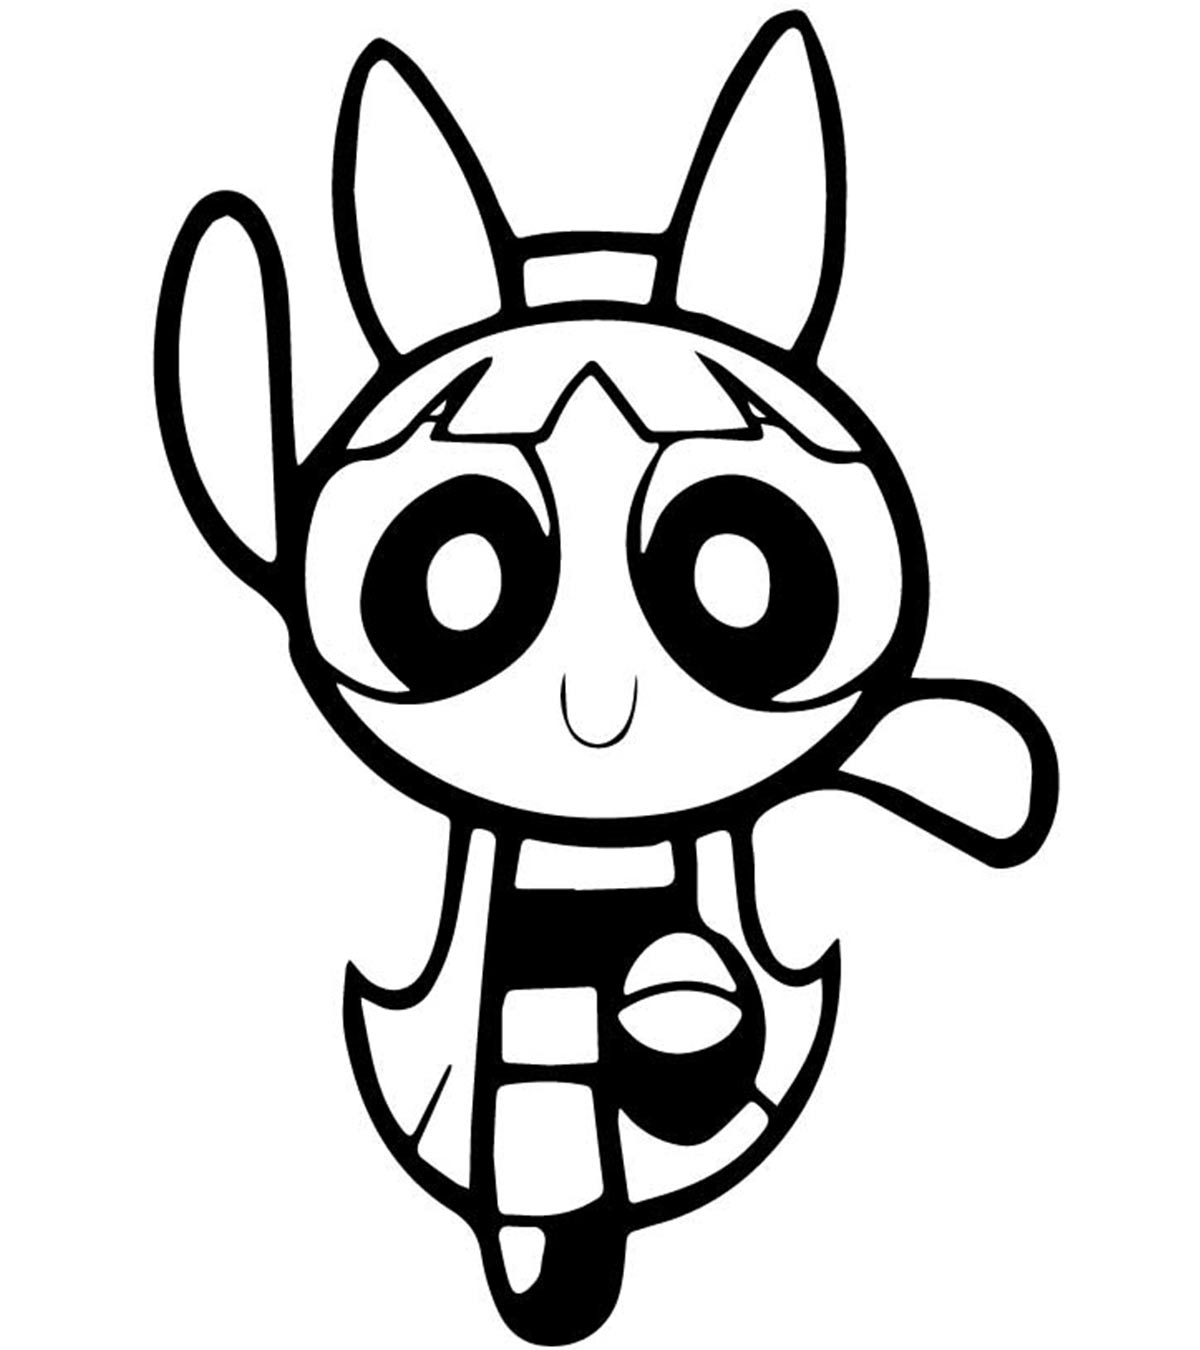 15 Amazing Powerpuff Girls Coloring Pages For Your Little Ones